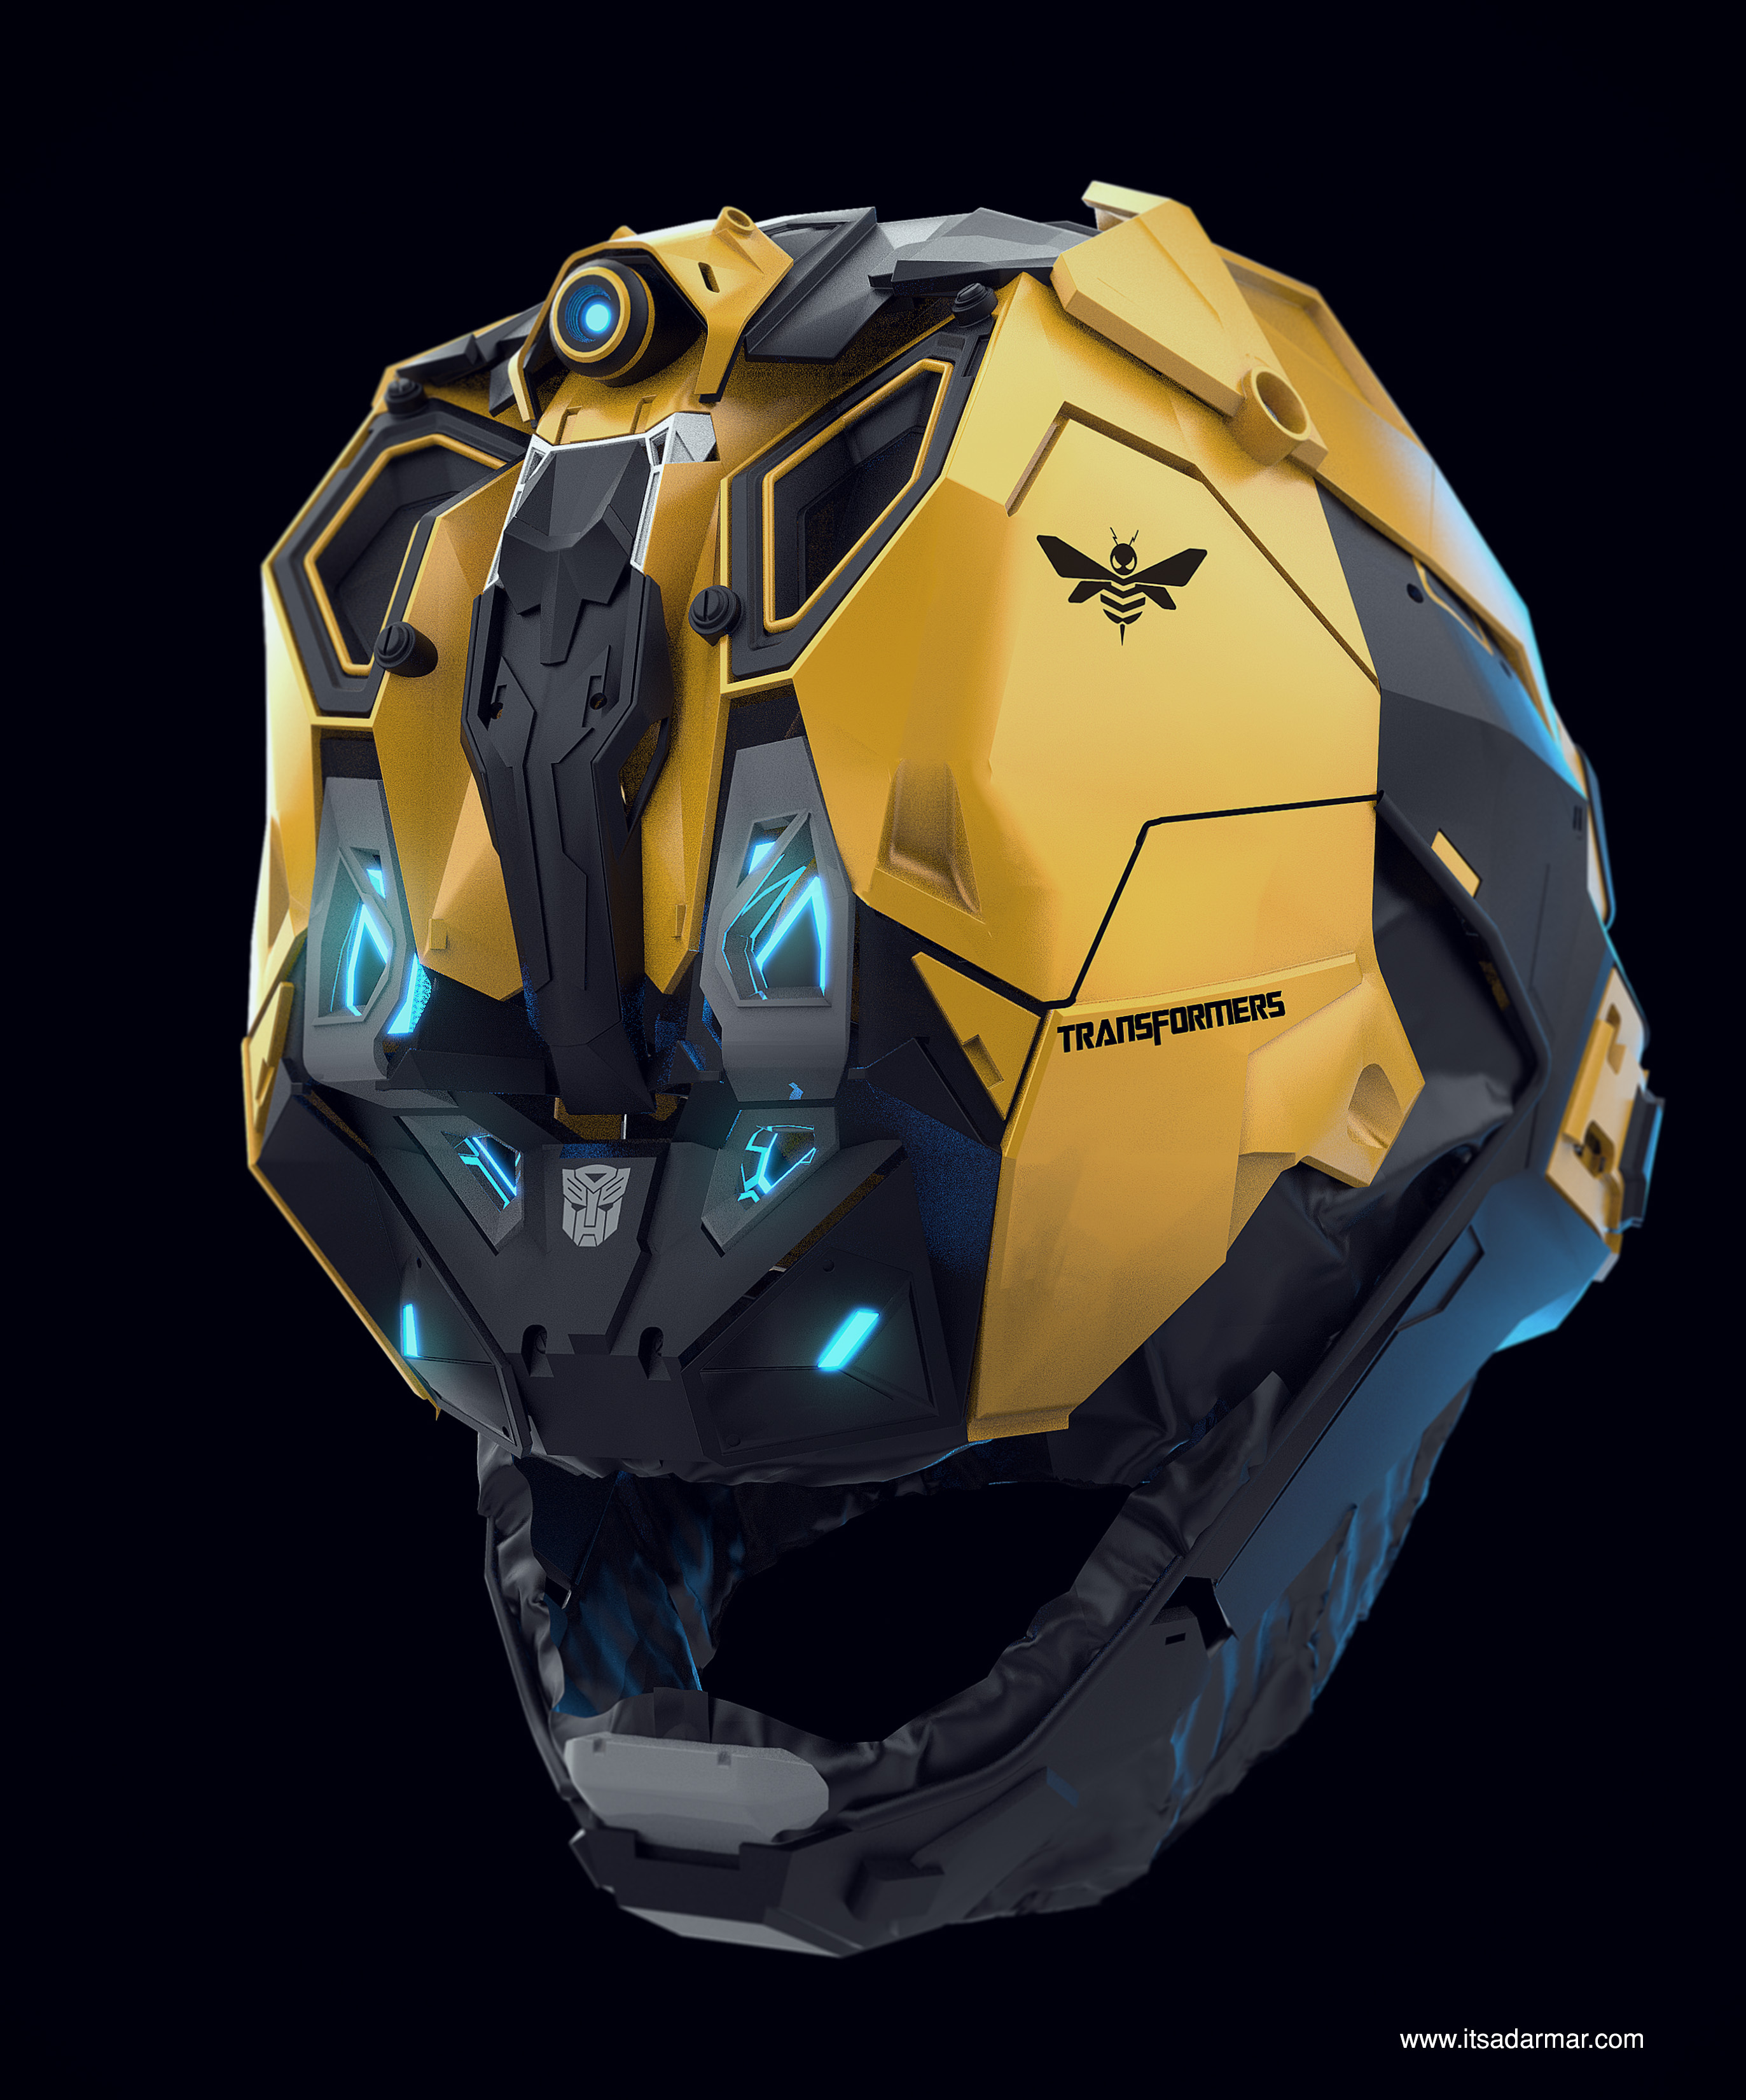 WHY I BLENDER | Bumblebee Transformers Helmet (FAN ART) - YOUTUBE VIDEO - Finished Projects - Blender Artists Community